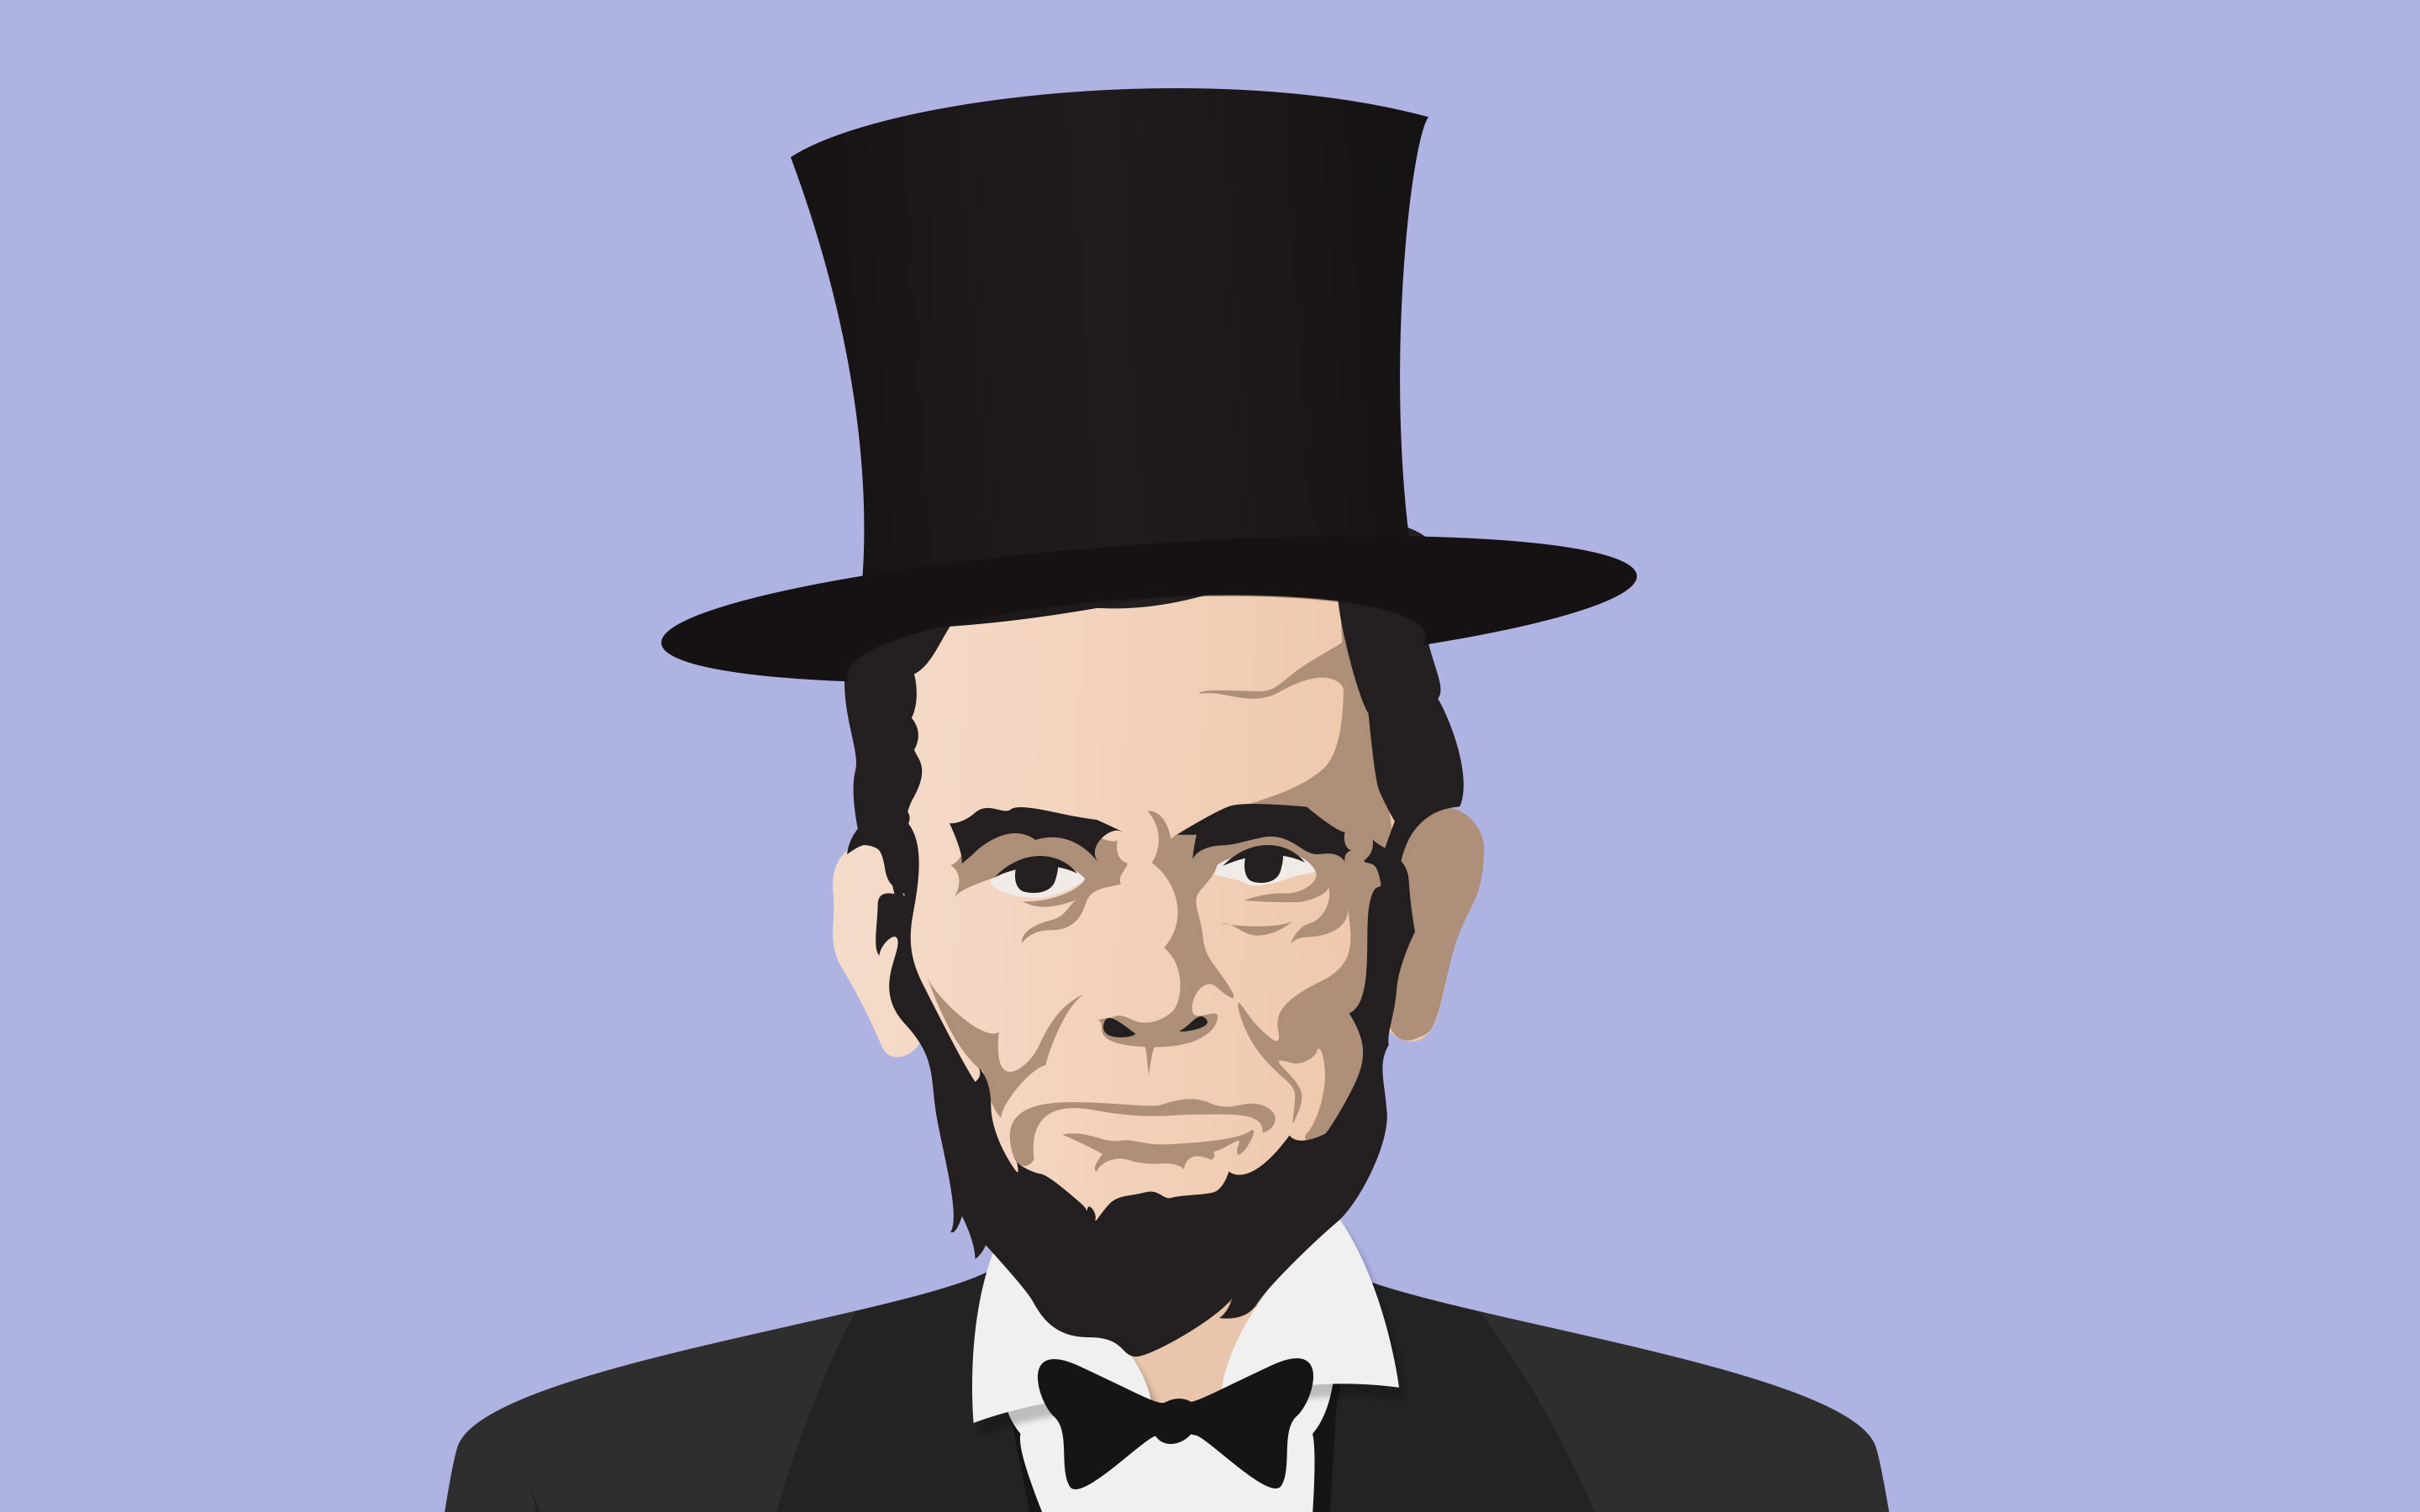 Abraham Lincoln Cartoon With Hat - 2880x1800 Wallpaper 